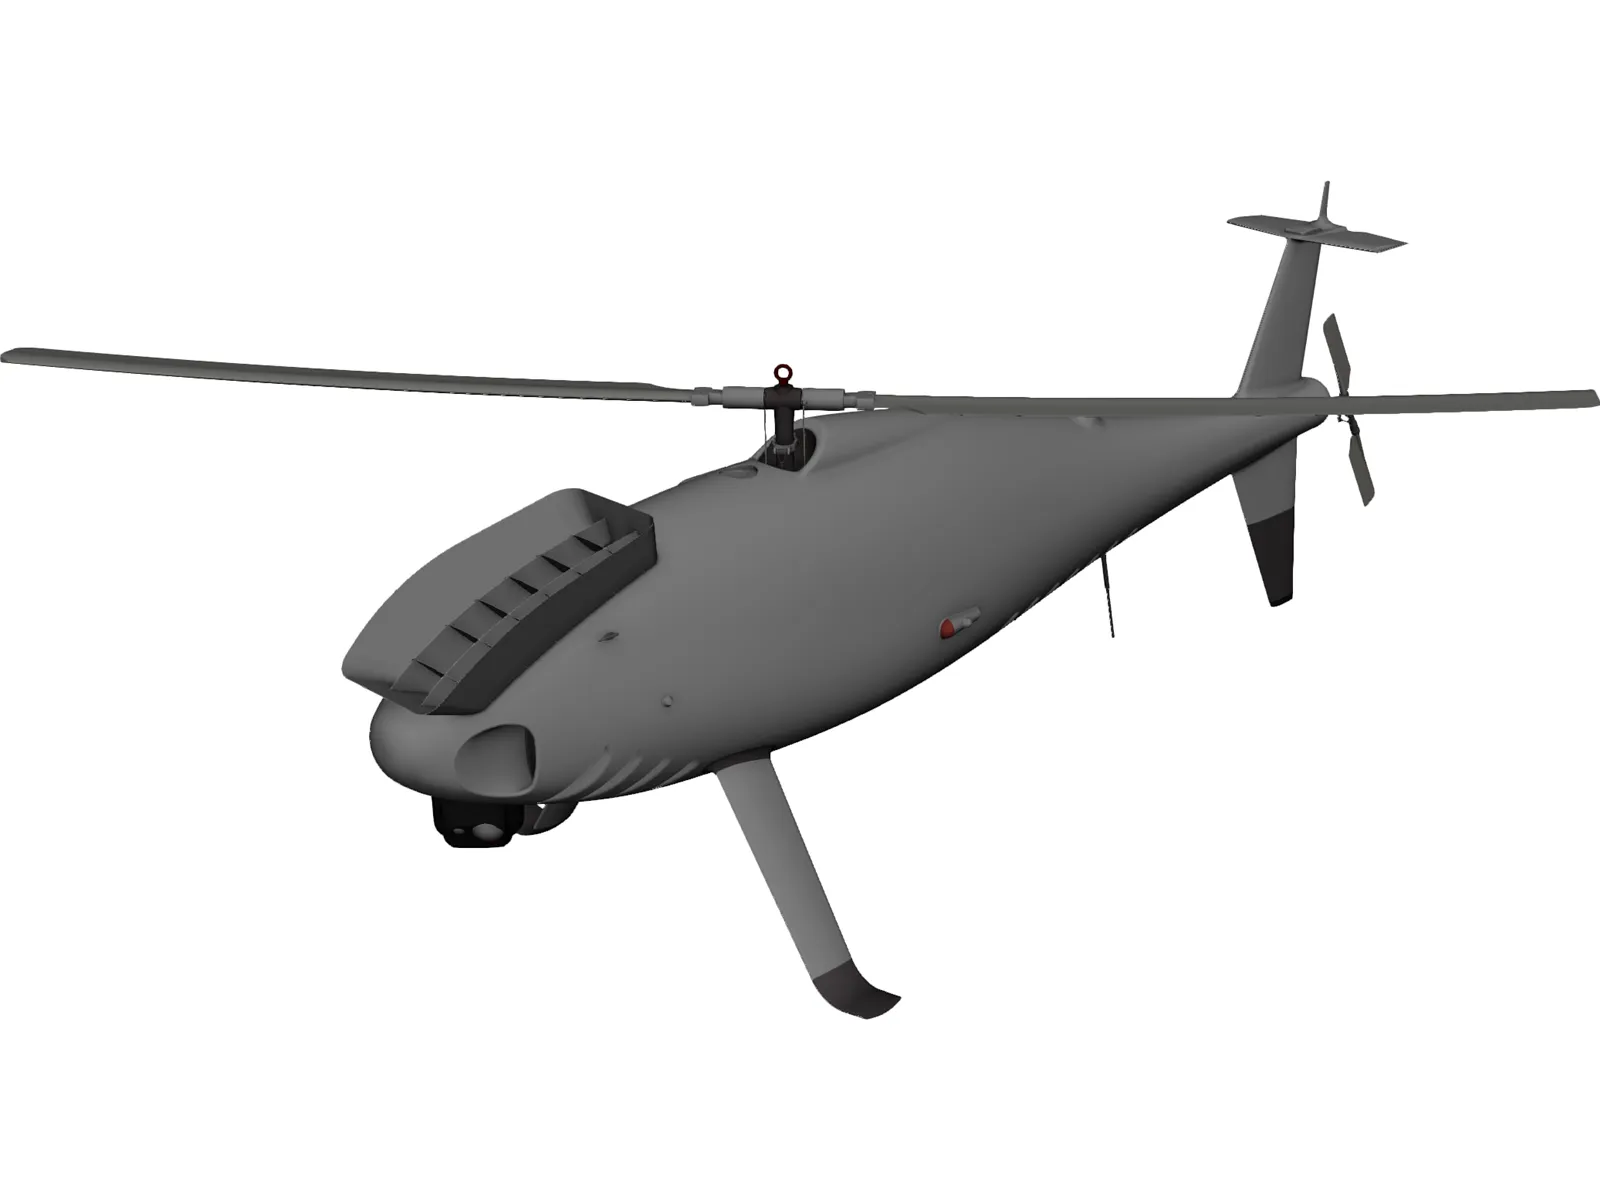 Schiebel Camcopter S-100 3D Model